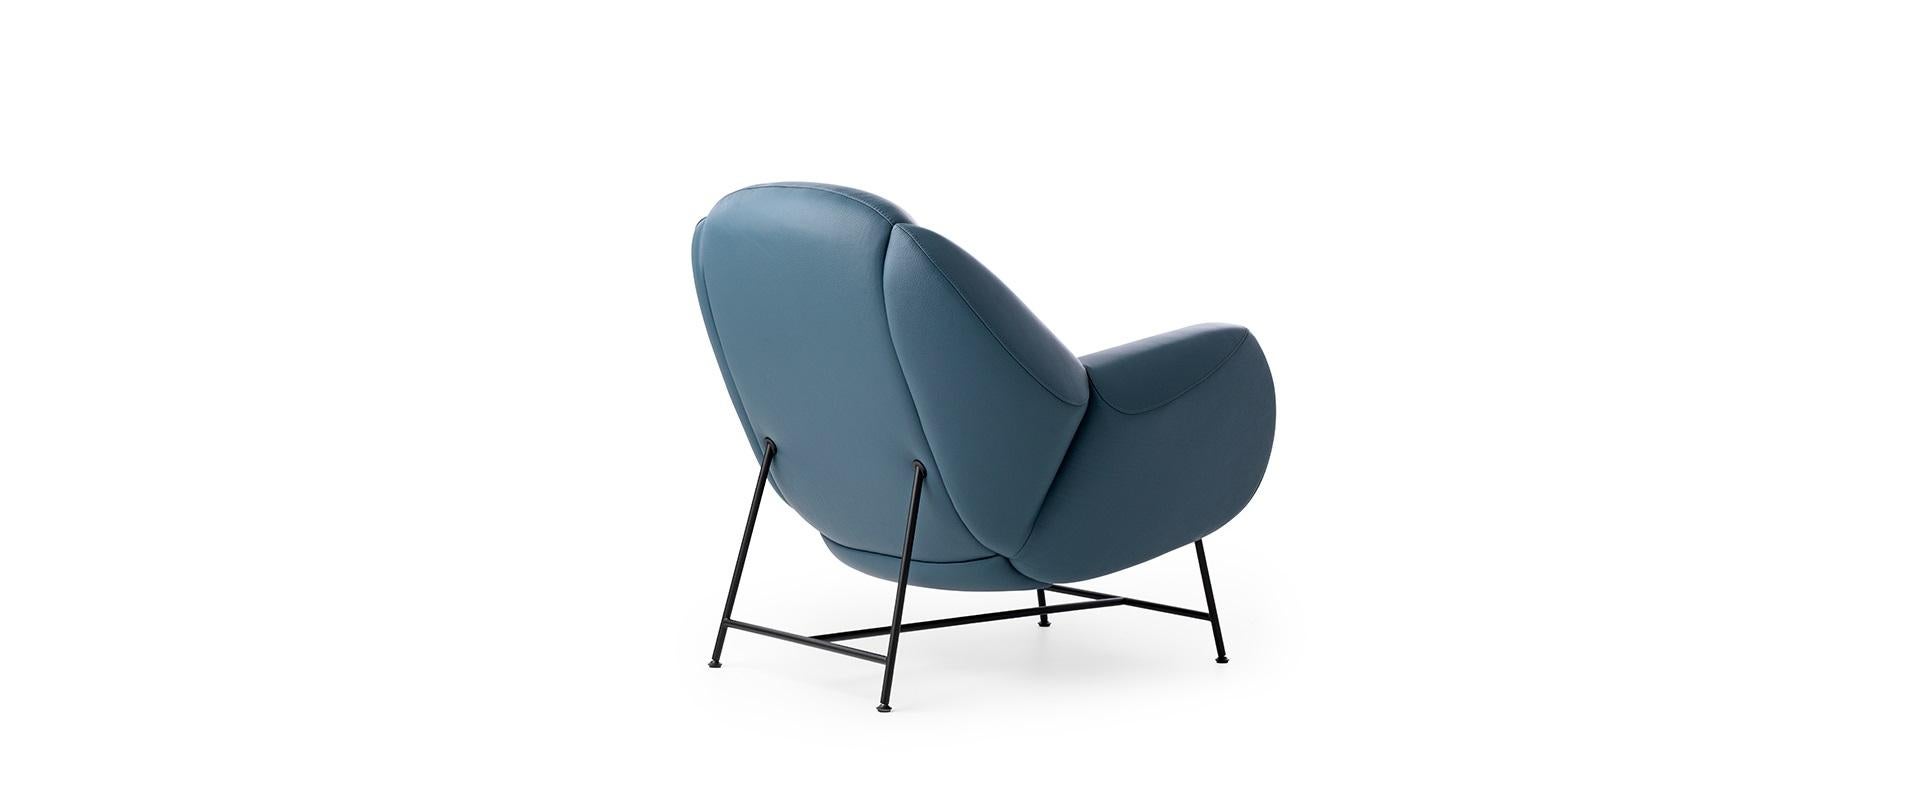 Ode to our heritage.

In its long design history, Leolux has built unique collections, year on year. The Anton armchair, named after the founder of Leolux, is loosely based on that illustrious heritage. The design alludes to the past and to the